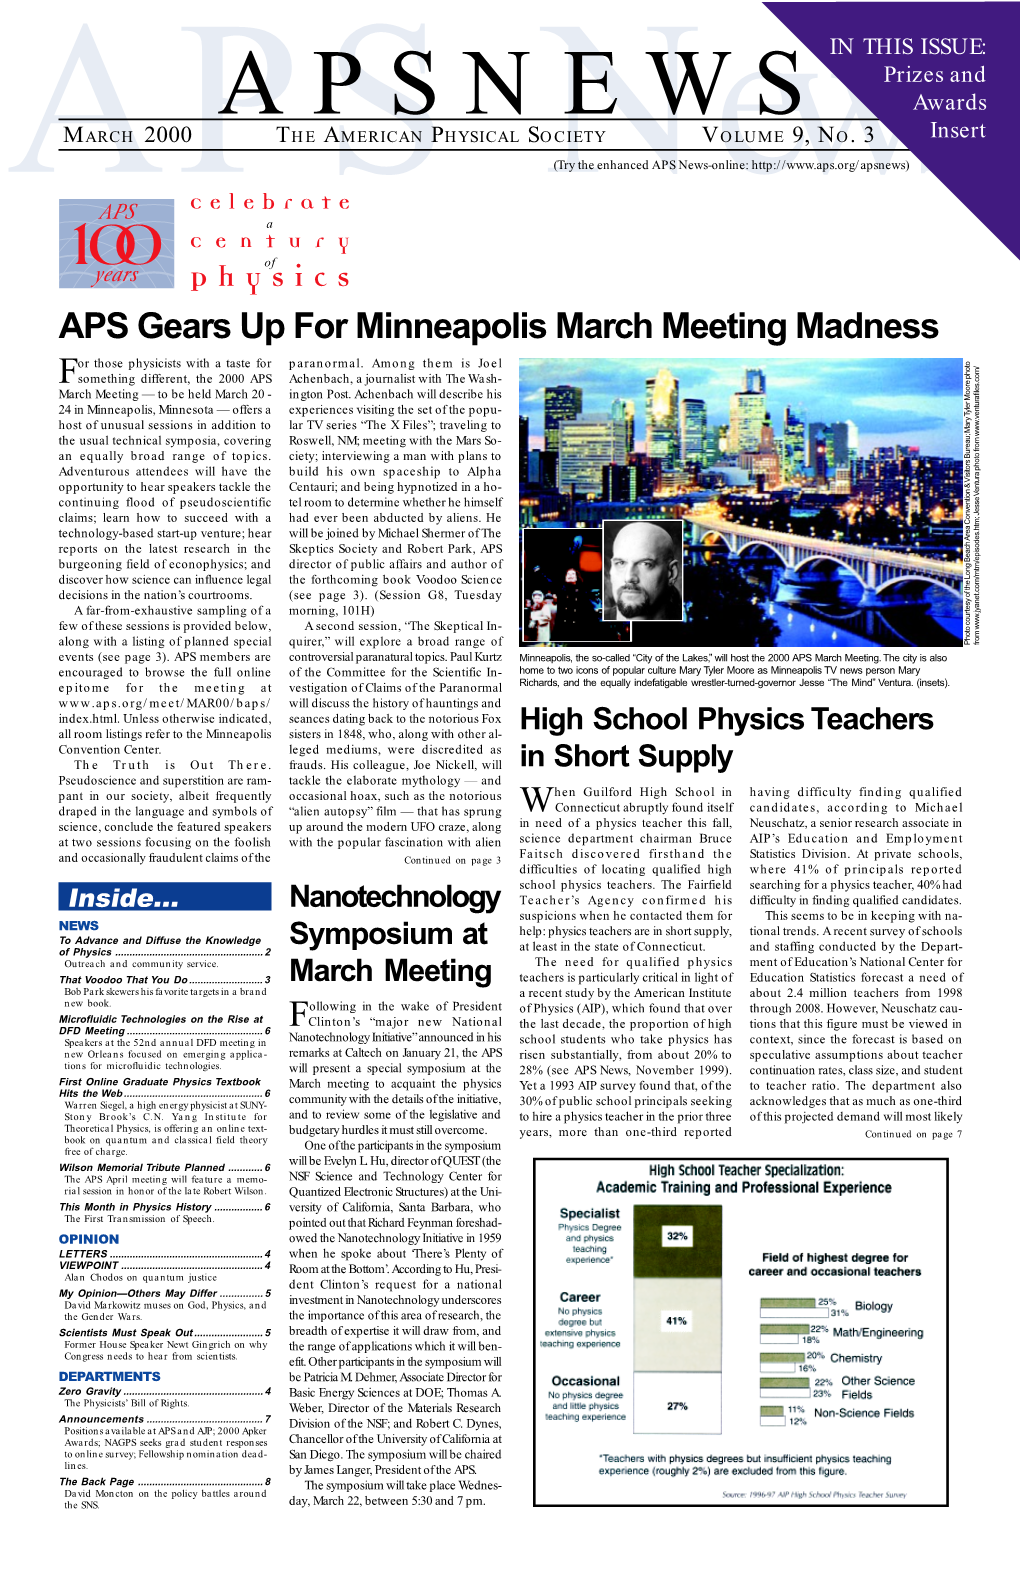 APS Gears up for Minneapolis March Meeting Madness Or Those Physicists with a Taste for Paranormal